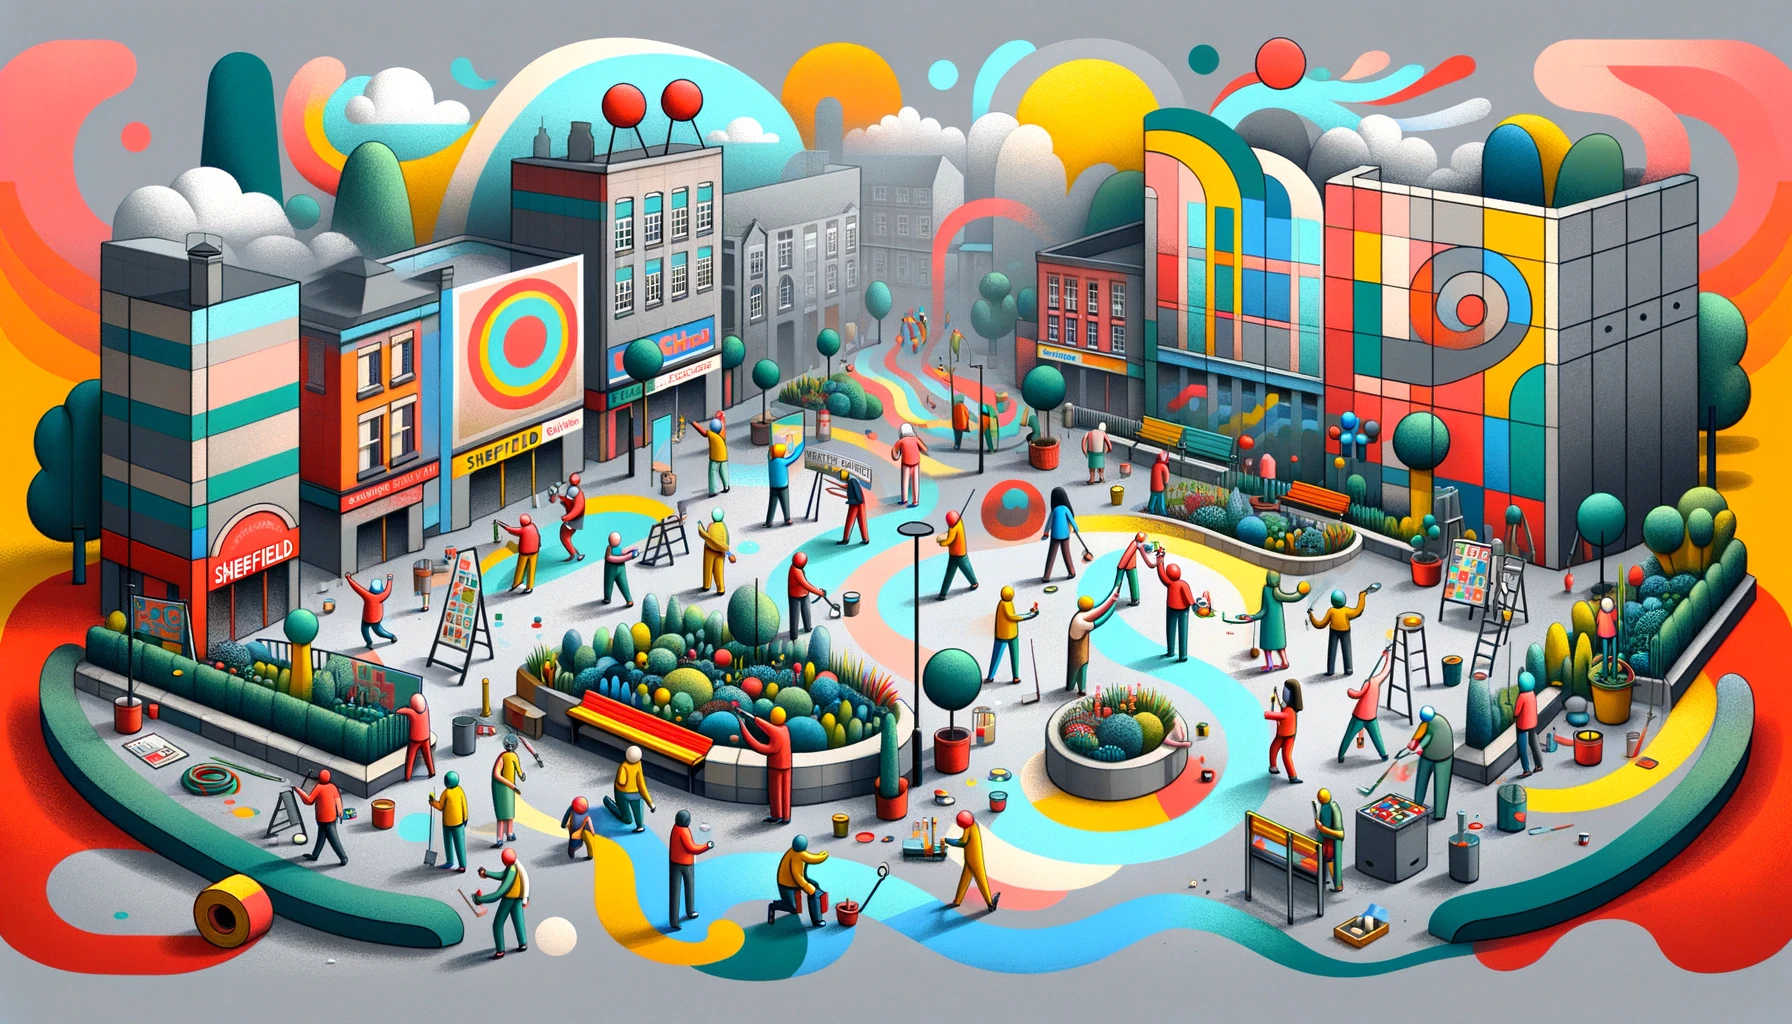 An abstract, vibrant community scene in Sheffield, with figures of varying ages engaging in transforming a public space from advertisement-dominated to a green, communal area, symbolized by bright, playful shapes and colors.